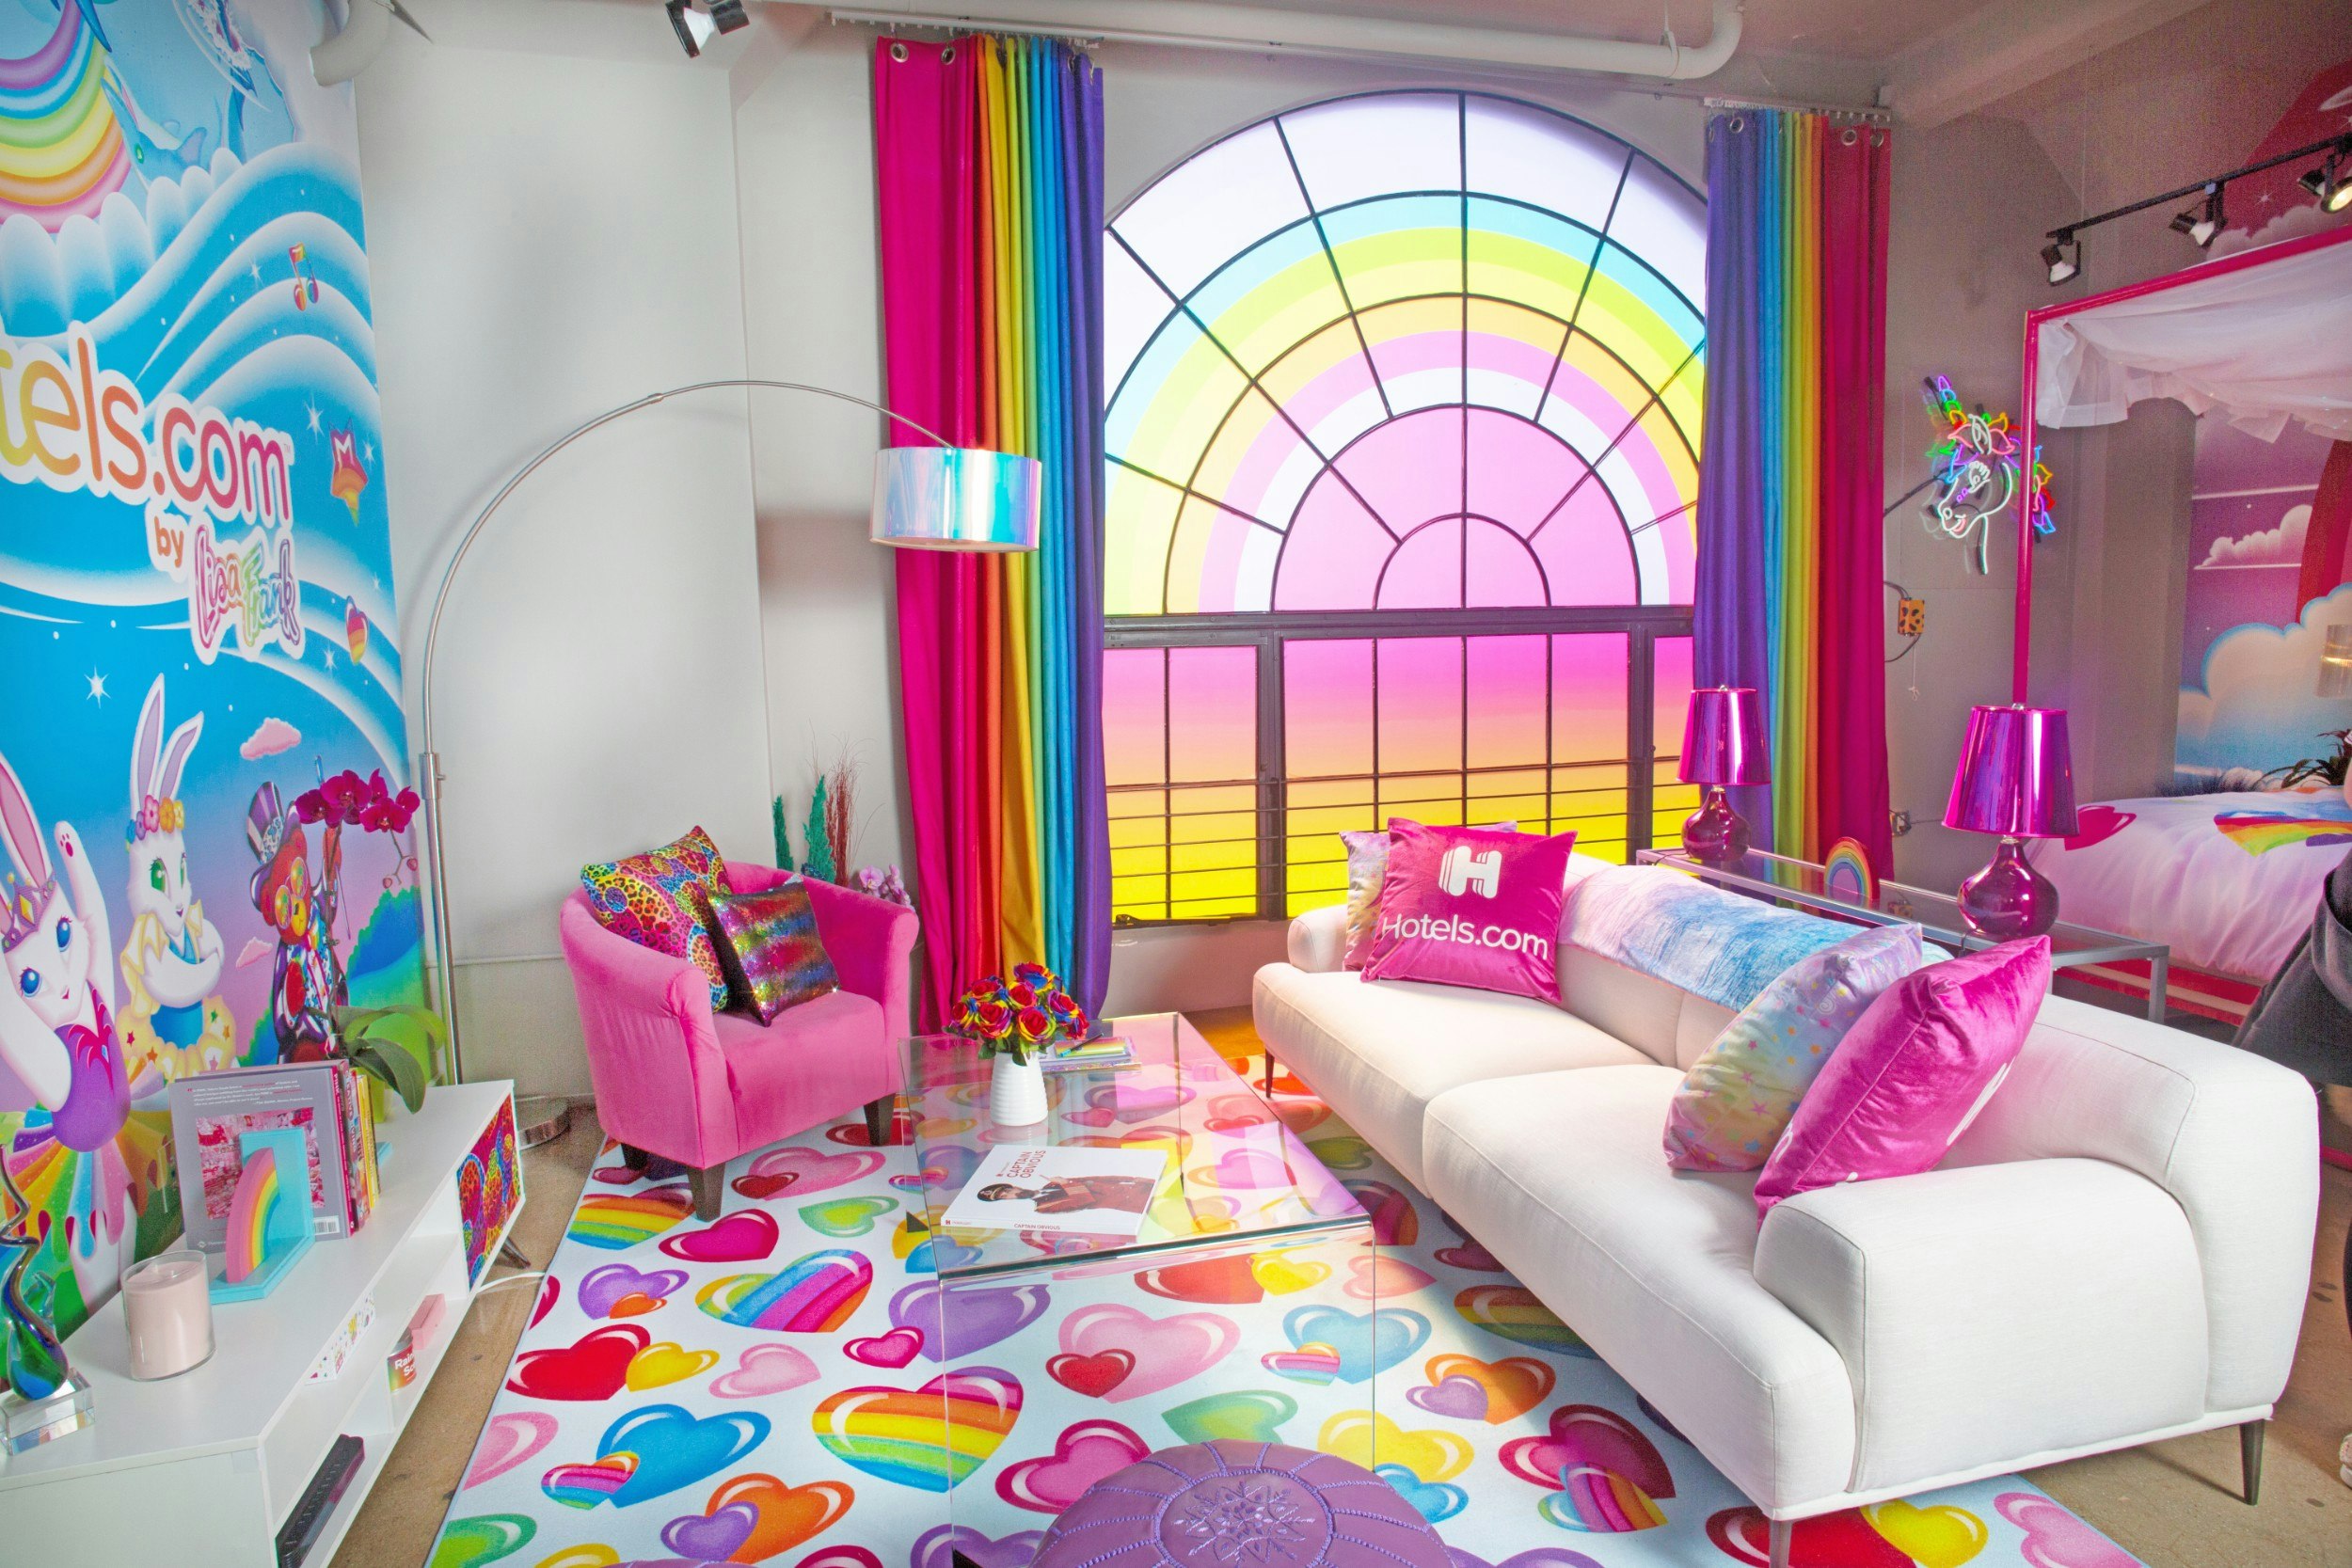 The colourful lounge complete with white sofa and rainbow window mural